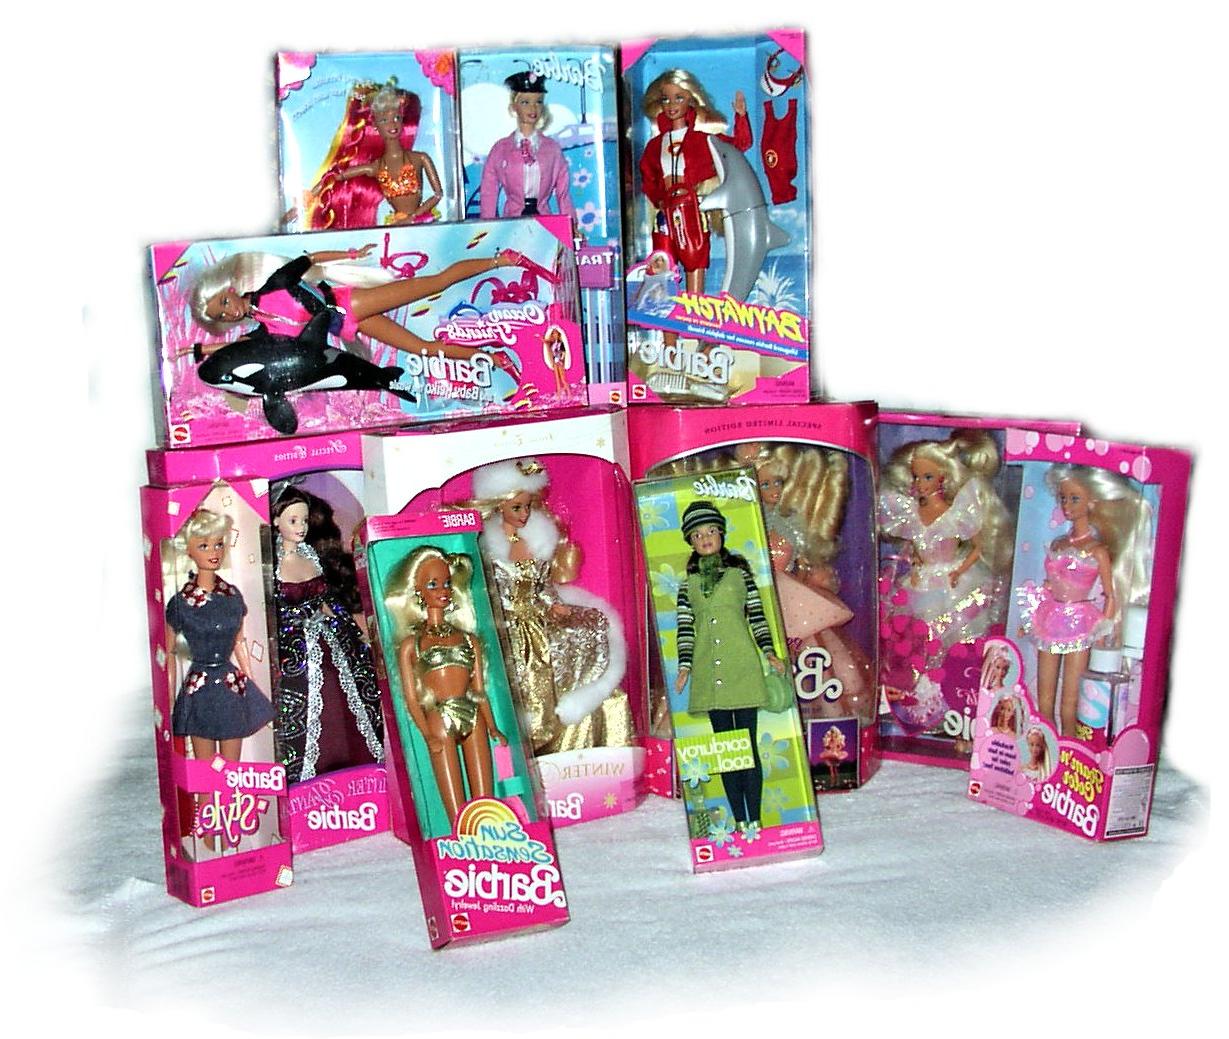 The Pink Box dolls pictured